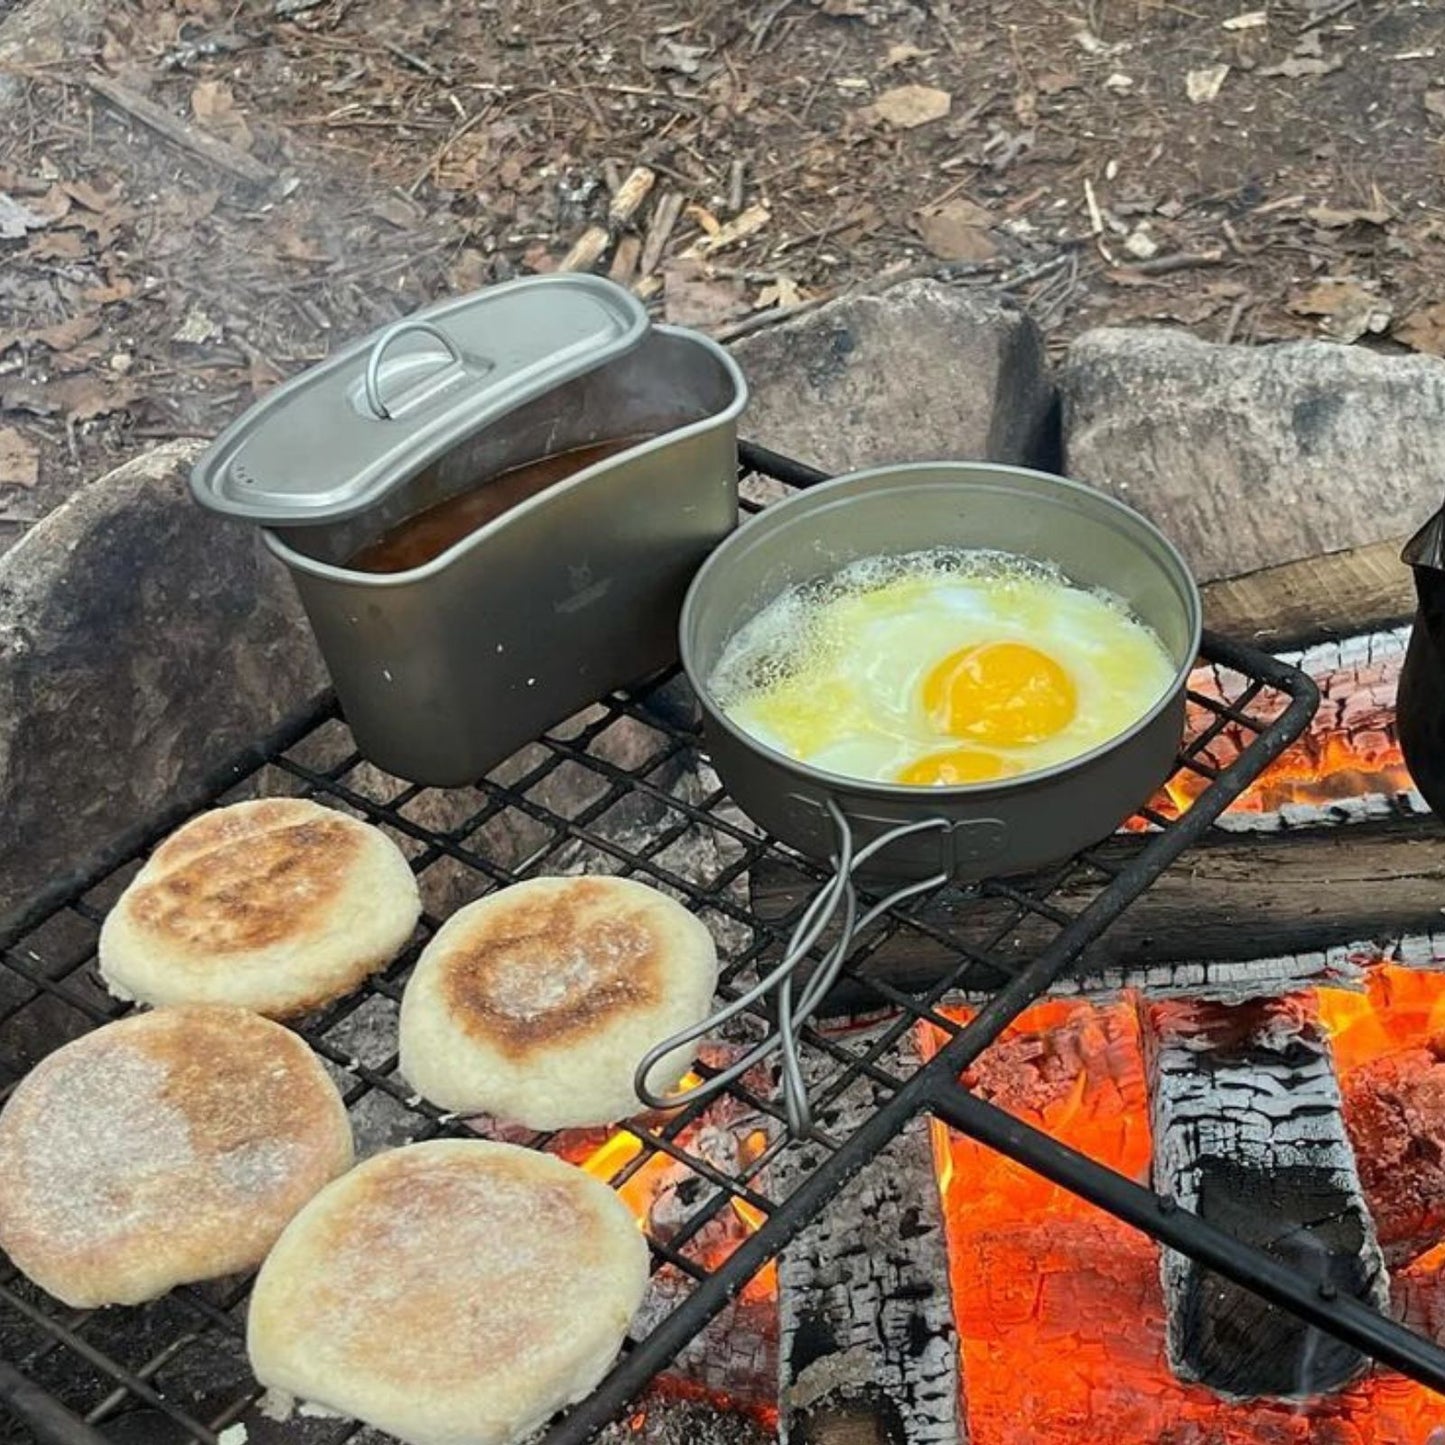 
                  
                    Ultralight 2-Piece SilverAnt Titanium Cookware Set in use image - frying eggs in the pan on a grill net
                  
                